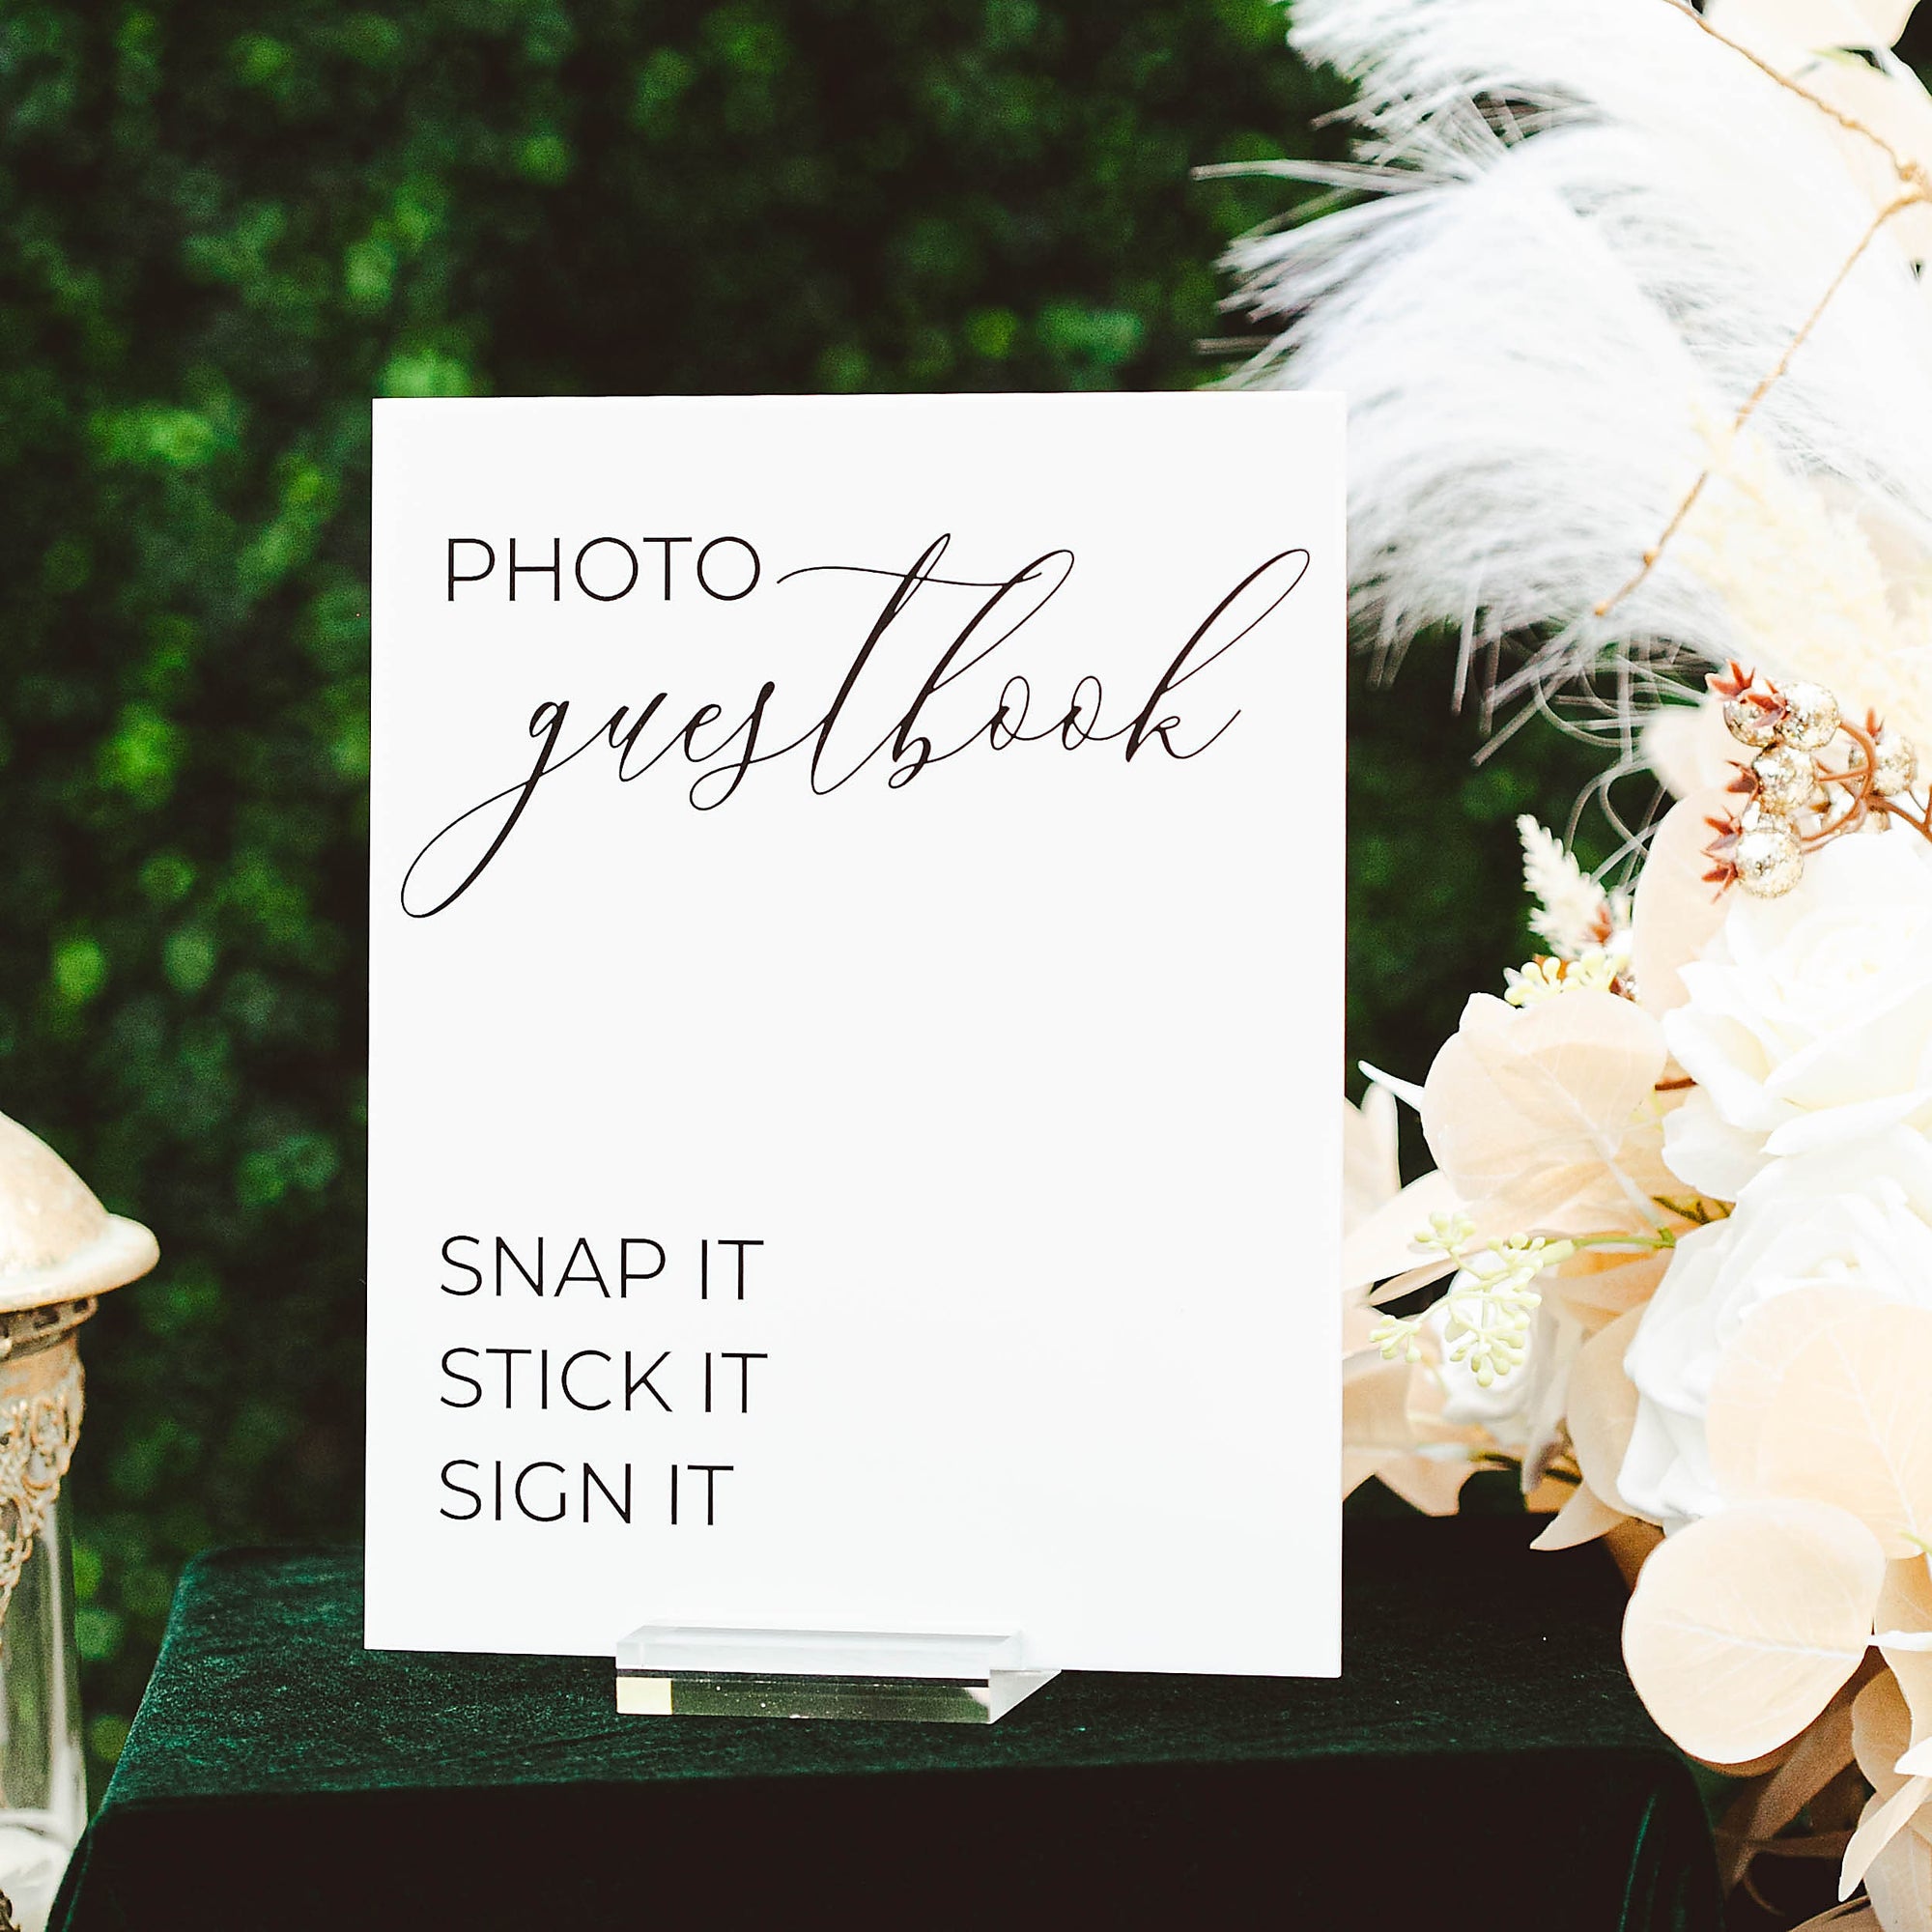 Photo Guestbook Snap It Stick It Sign It Clear Glass Look Acrylic Wedding Sign, Photo Booth Station Guest Book Lucite Table Sign